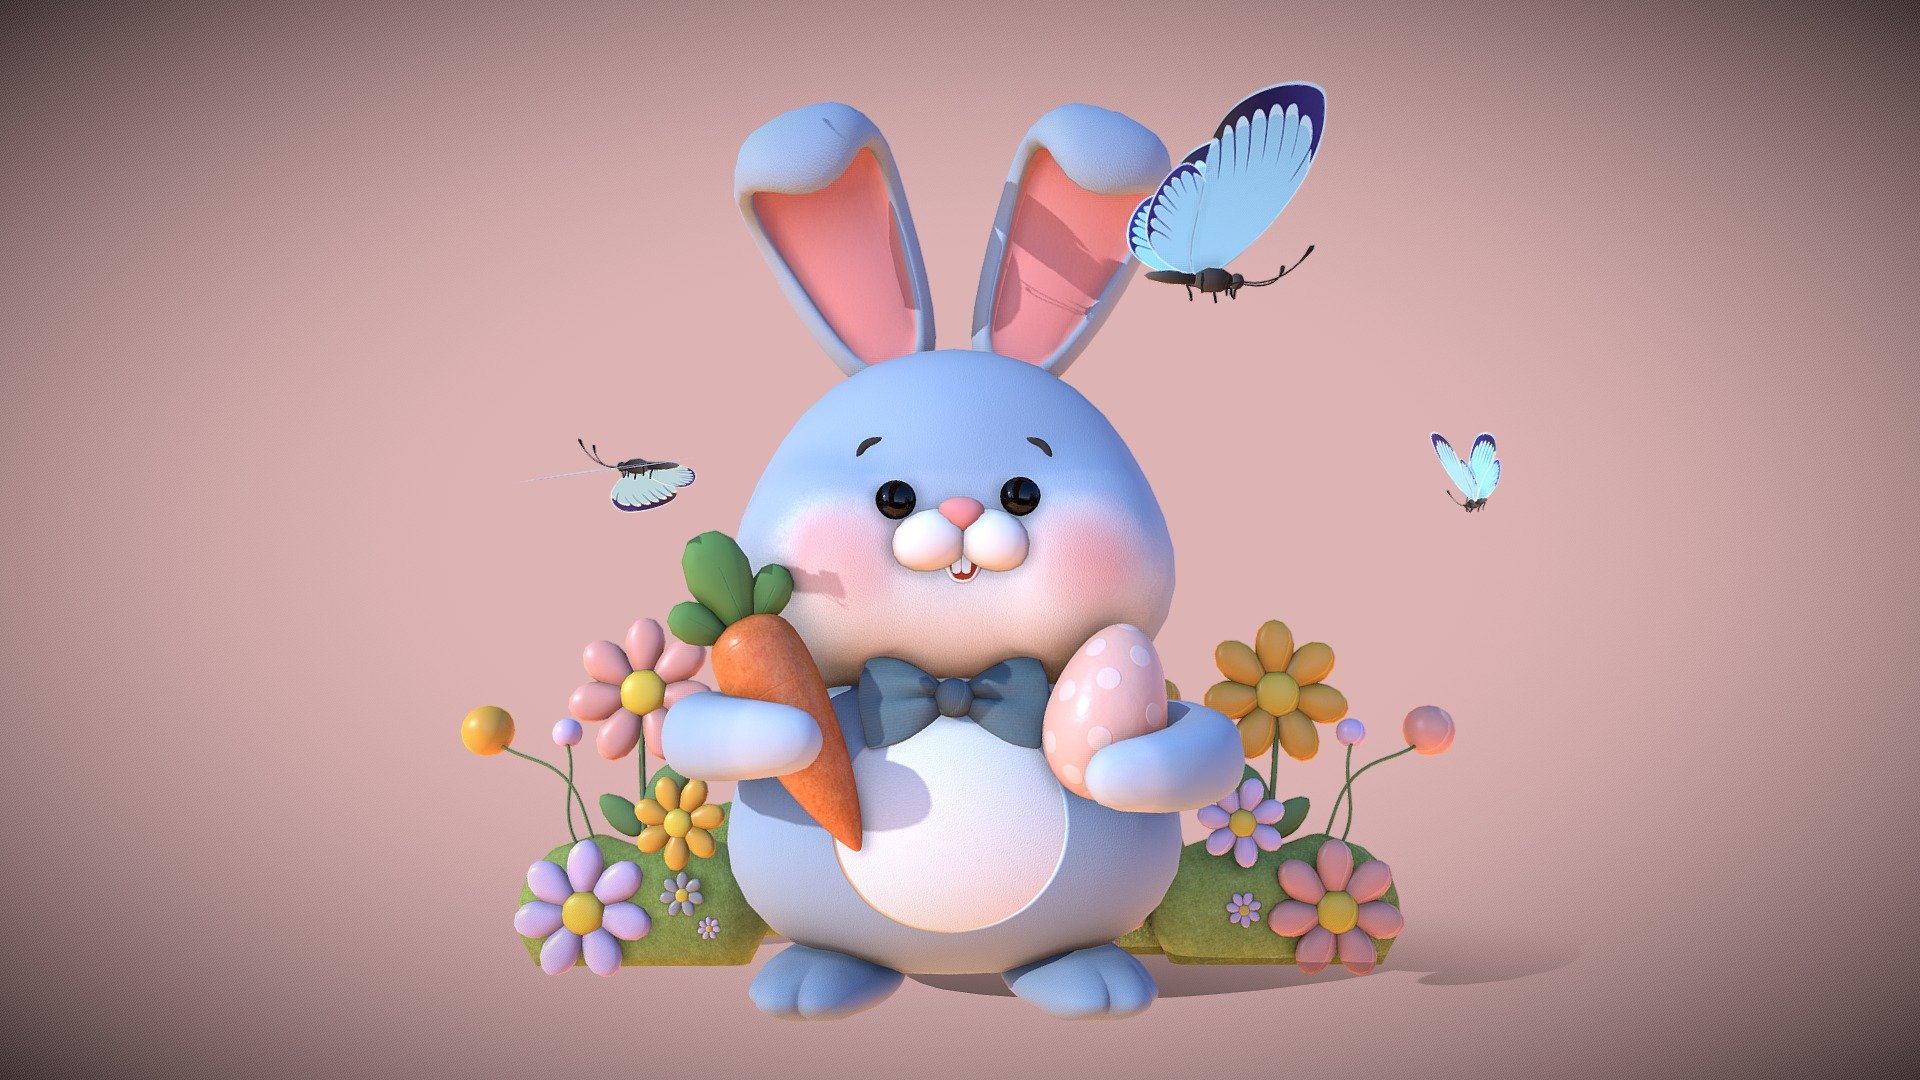 Introducing our 3D creation which captures the essence of Easter with an adorable bunny poised for a lively hopscotch adventure surrounded by flying butterflies. With its expressive features and pastel hues, this virtual bunny brings joy and whimsy to your Easter celebrations 3d model